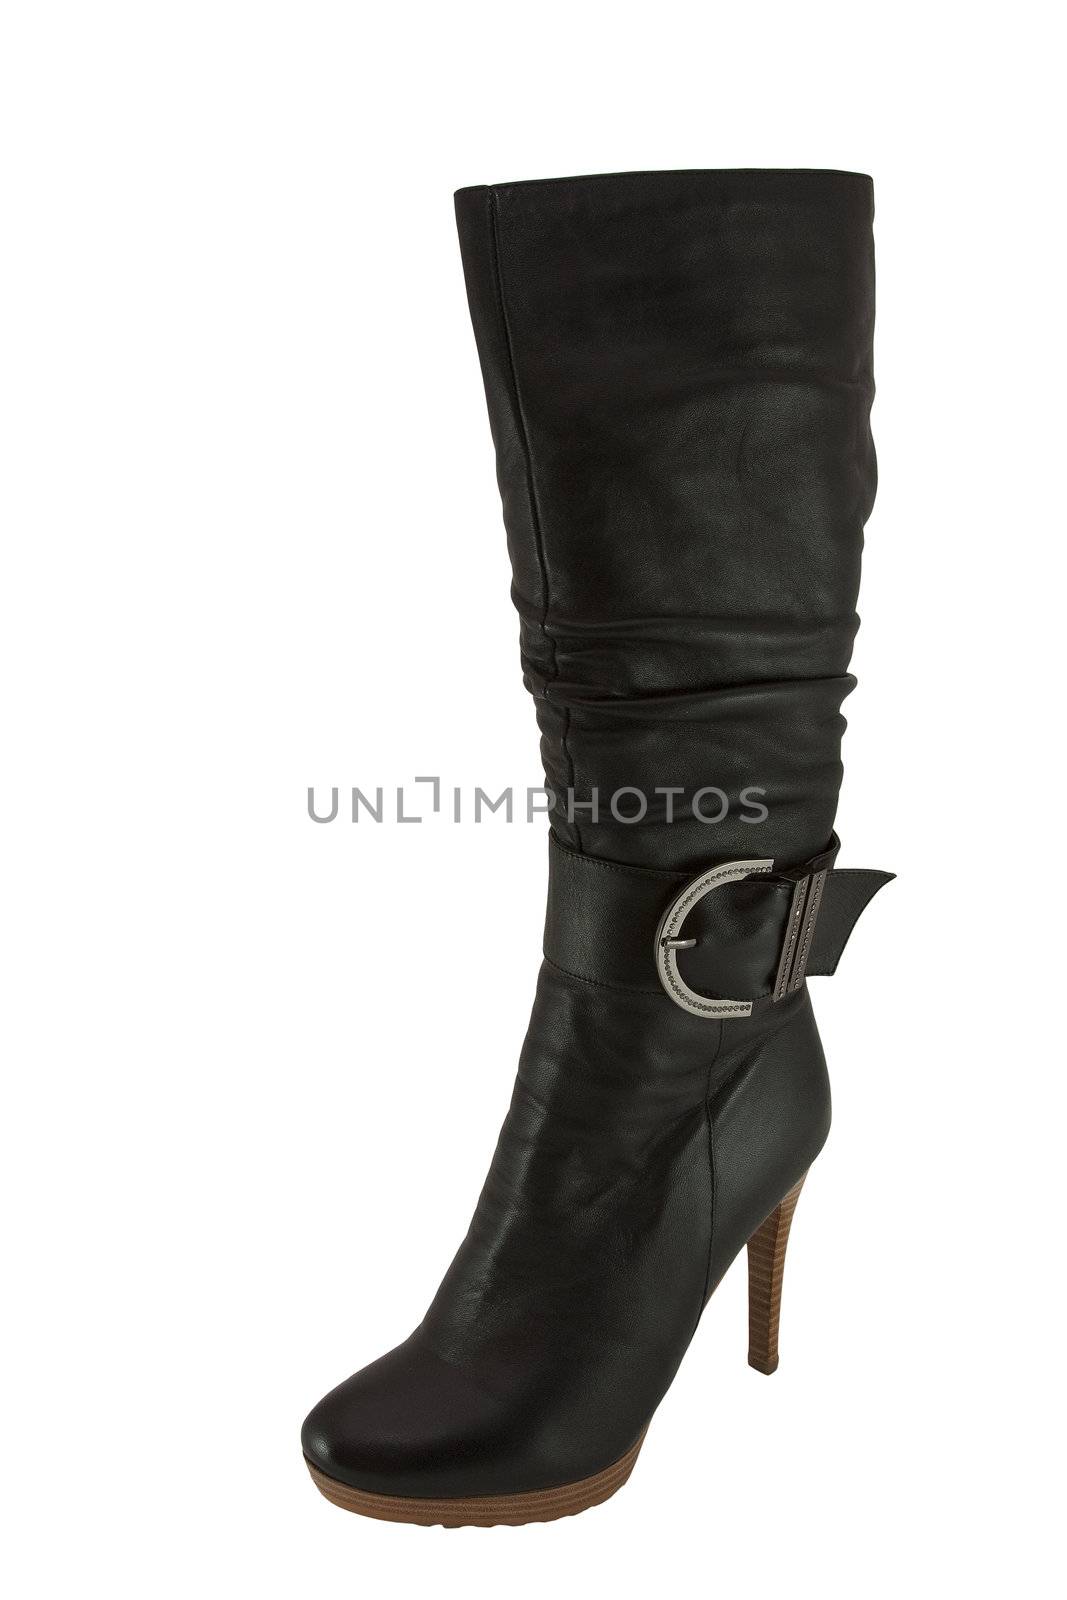 Stylish ladies' boot on a high heel by Jaklin